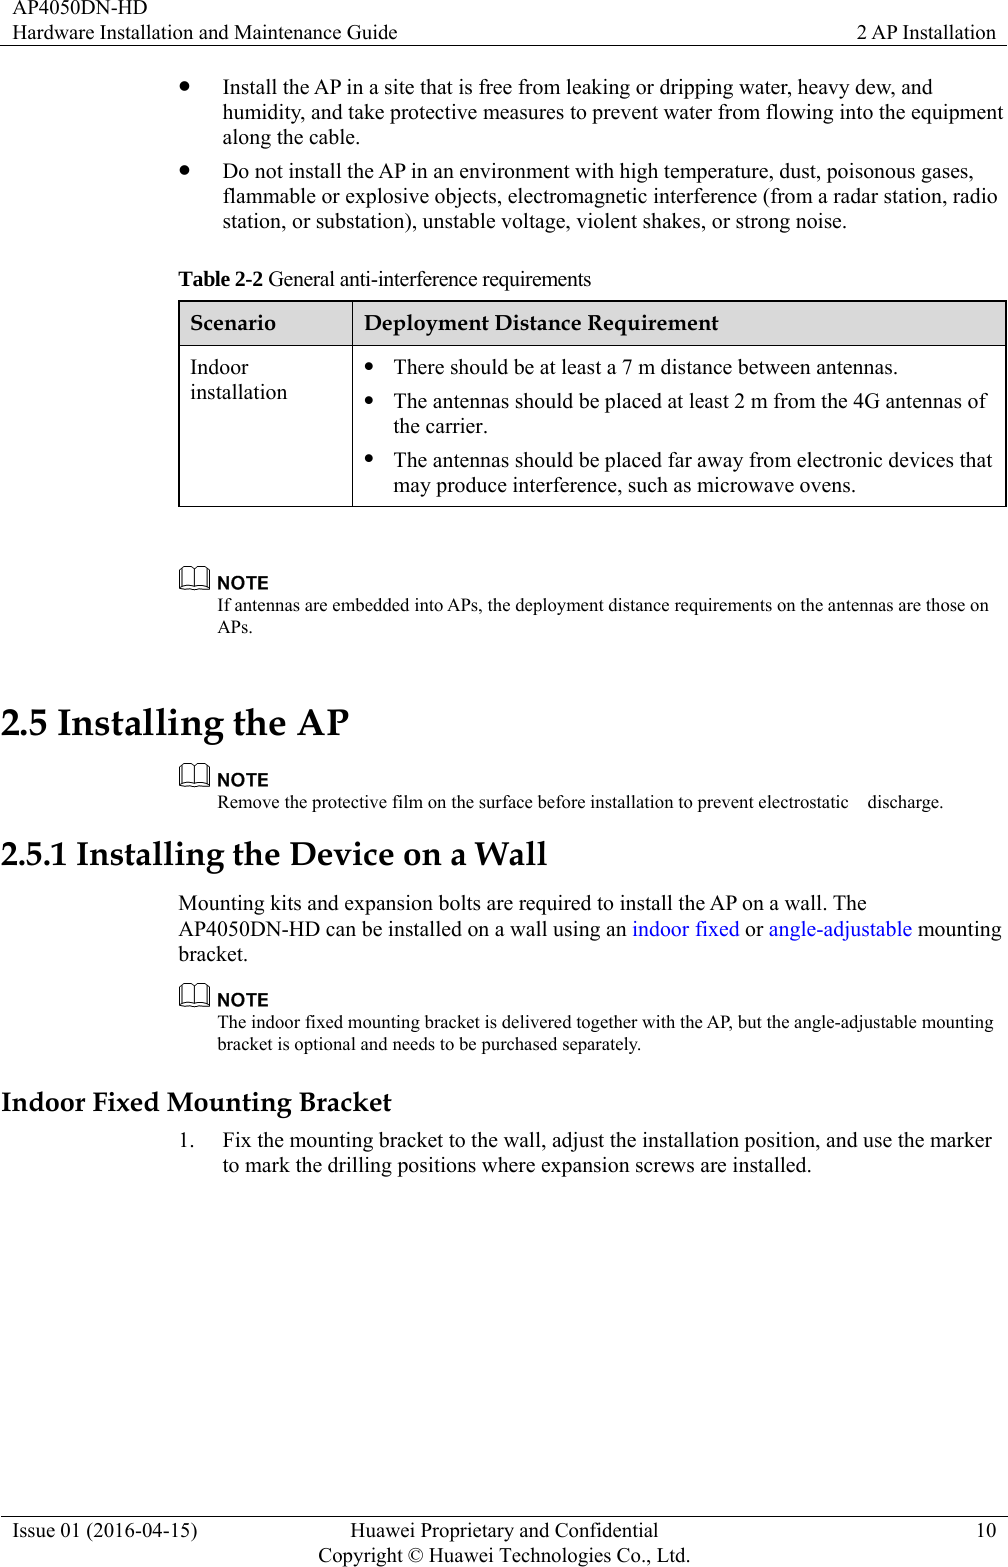 AP4050DN-HD Hardware Installation and Maintenance Guide  2 AP Installation Issue 01 (2016-04-15)  Huawei Proprietary and Confidential         Copyright © Huawei Technologies Co., Ltd.10  Install the AP in a site that is free from leaking or dripping water, heavy dew, and humidity, and take protective measures to prevent water from flowing into the equipment along the cable.  Do not install the AP in an environment with high temperature, dust, poisonous gases, flammable or explosive objects, electromagnetic interference (from a radar station, radio station, or substation), unstable voltage, violent shakes, or strong noise. Table 2-2 General anti-interference requirements Scenario  Deployment Distance Requirement Indoor installation  There should be at least a 7 m distance between antennas.  The antennas should be placed at least 2 m from the 4G antennas of the carrier.  The antennas should be placed far away from electronic devices that may produce interference, such as microwave ovens.   If antennas are embedded into APs, the deployment distance requirements on the antennas are those on APs. 2.5 Installing the AP  Remove the protective film on the surface before installation to prevent electrostatic    discharge. 2.5.1 Installing the Device on a Wall Mounting kits and expansion bolts are required to install the AP on a wall. The AP4050DN-HD can be installed on a wall using an indoor fixed or angle-adjustable mounting bracket.   The indoor fixed mounting bracket is delivered together with the AP, but the angle-adjustable mounting bracket is optional and needs to be purchased separately. Indoor Fixed Mounting Bracket 1. Fix the mounting bracket to the wall, adjust the installation position, and use the marker to mark the drilling positions where expansion screws are installed. 